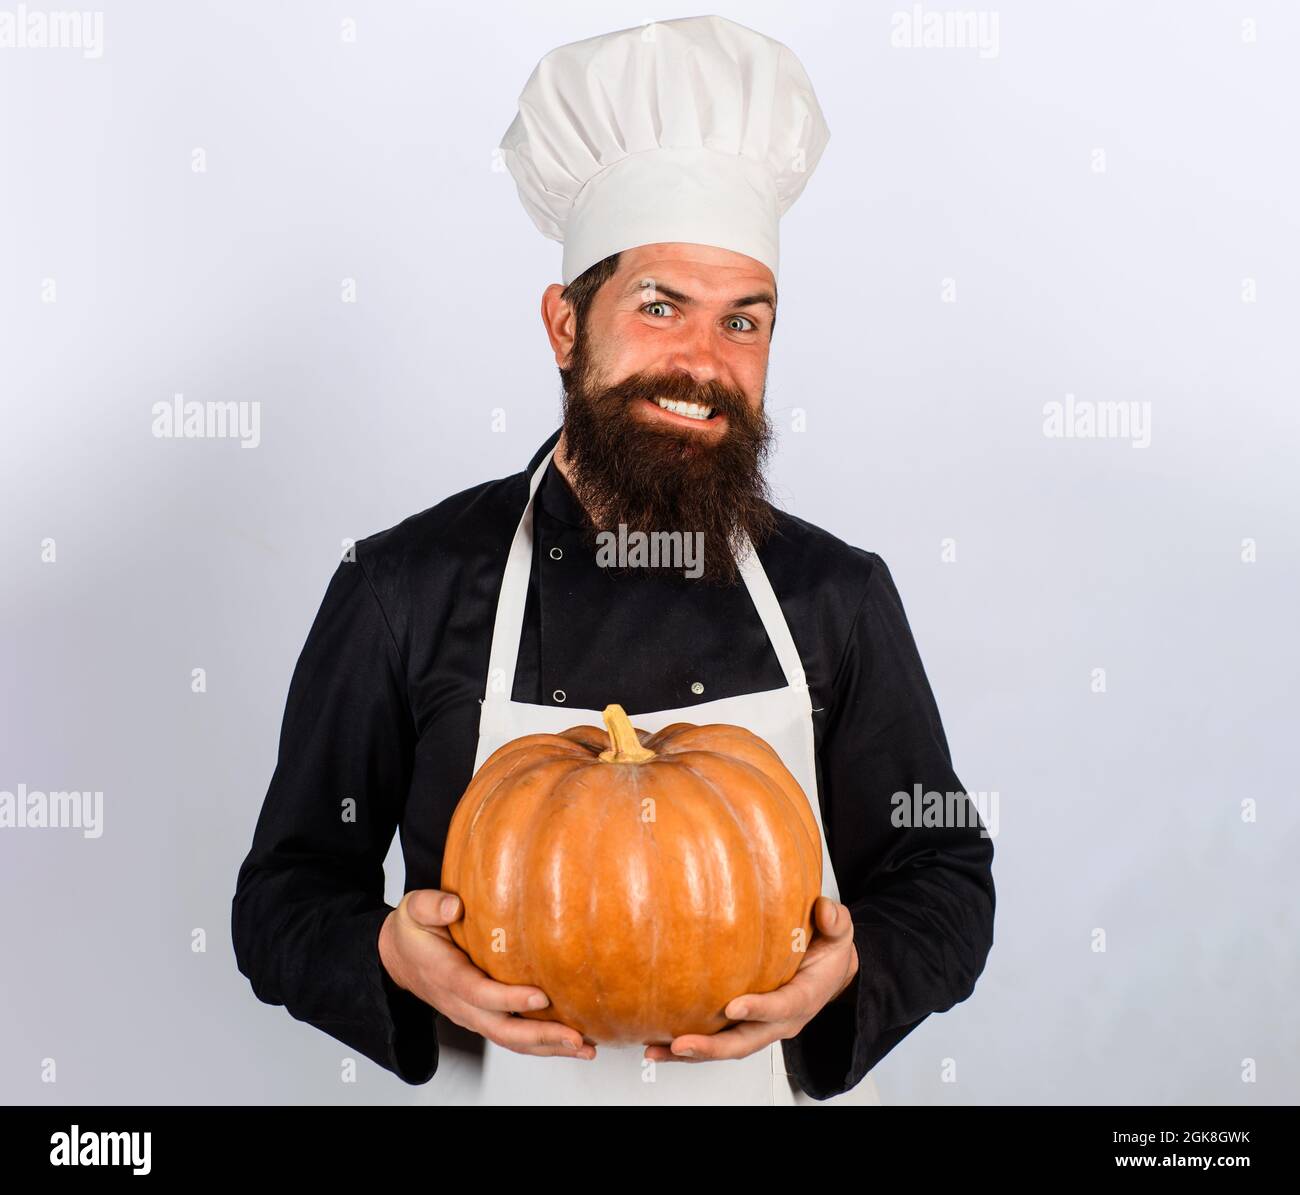 Male chef with pumpkin. Autumn vegetables. Pumpkin for Halloween. Diet food. Healthy vegetarian eating. Stock Photo